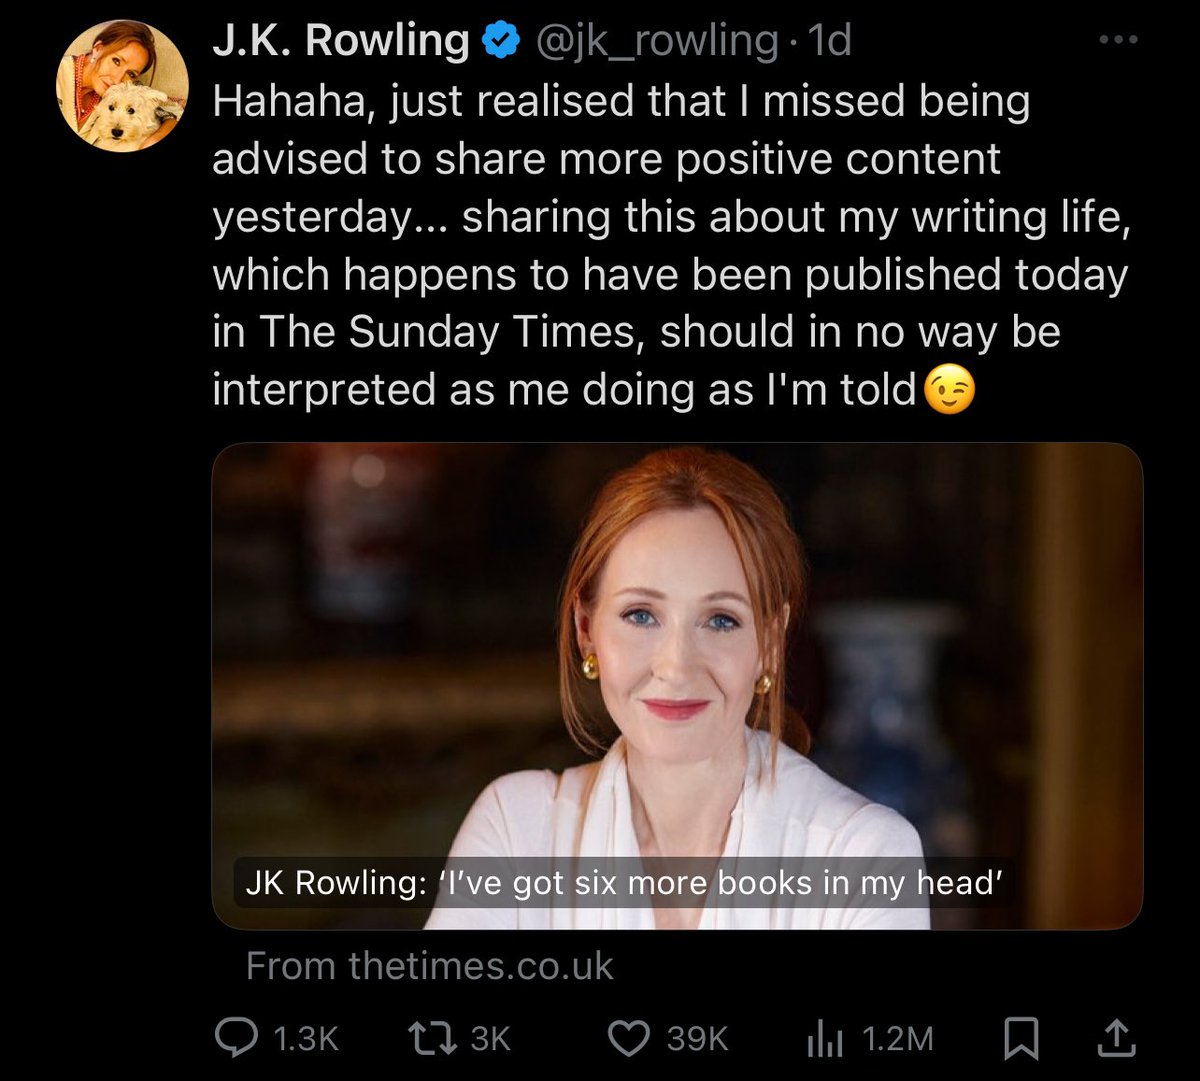 JK Rowling: Men should never be able to tell women what to say Biggest misogynist on Earth: Shut up and smile more JK Rowling: S-s-s-sorry I’m sorry for my emotional girl brain I’m sorry